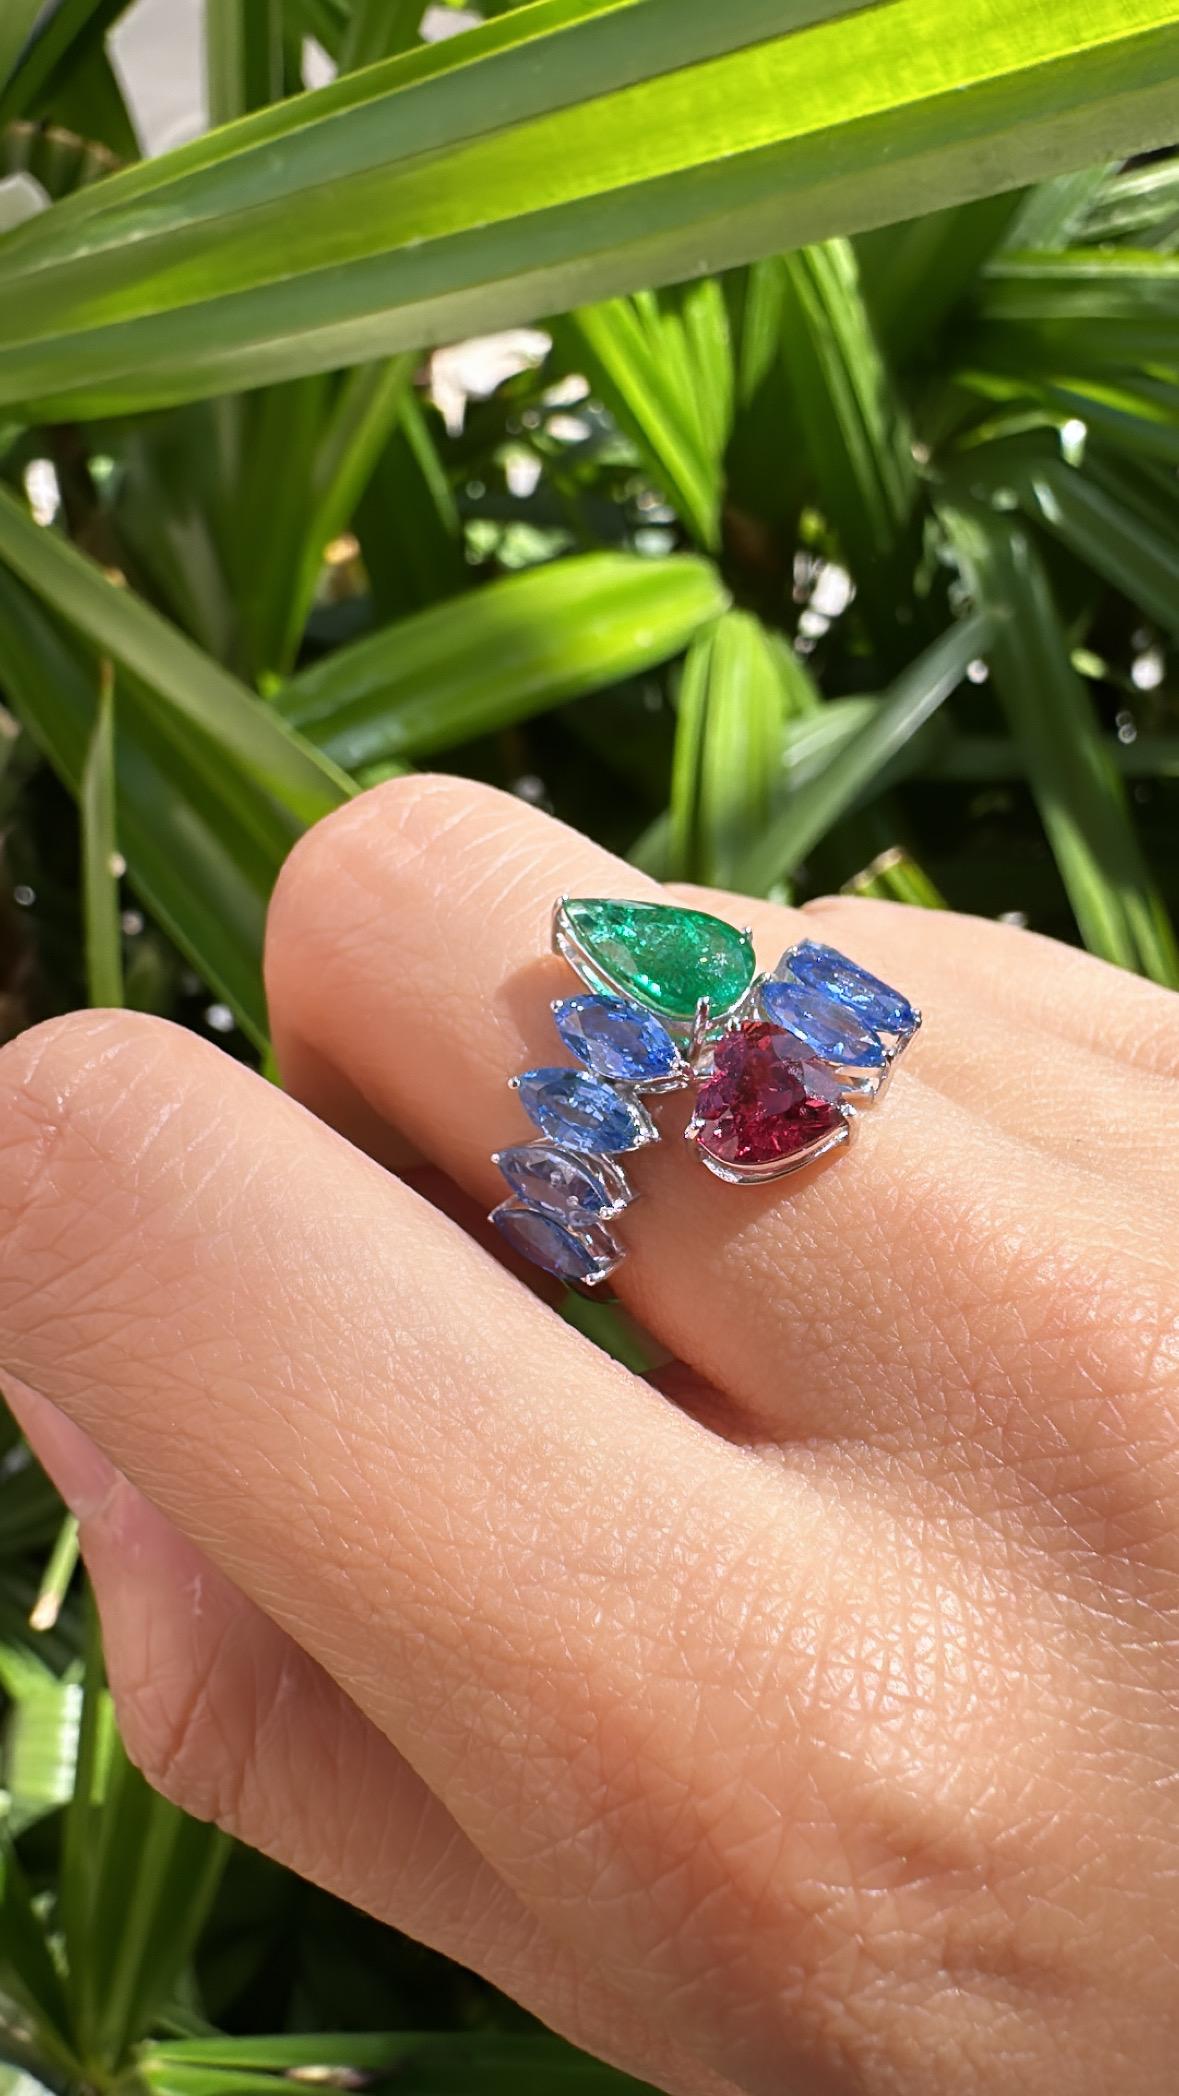 A very beautiful and gorgeous, Blue Sapphire, Emerald & Rubellite Band Ring set in 18K White Gold. The weight of the Marquise shaped Blue Sapphires is 3.44 carats. The Blue Sapphires are of Ceylon (Sri Lankan) origin. The weight of the pear shaped